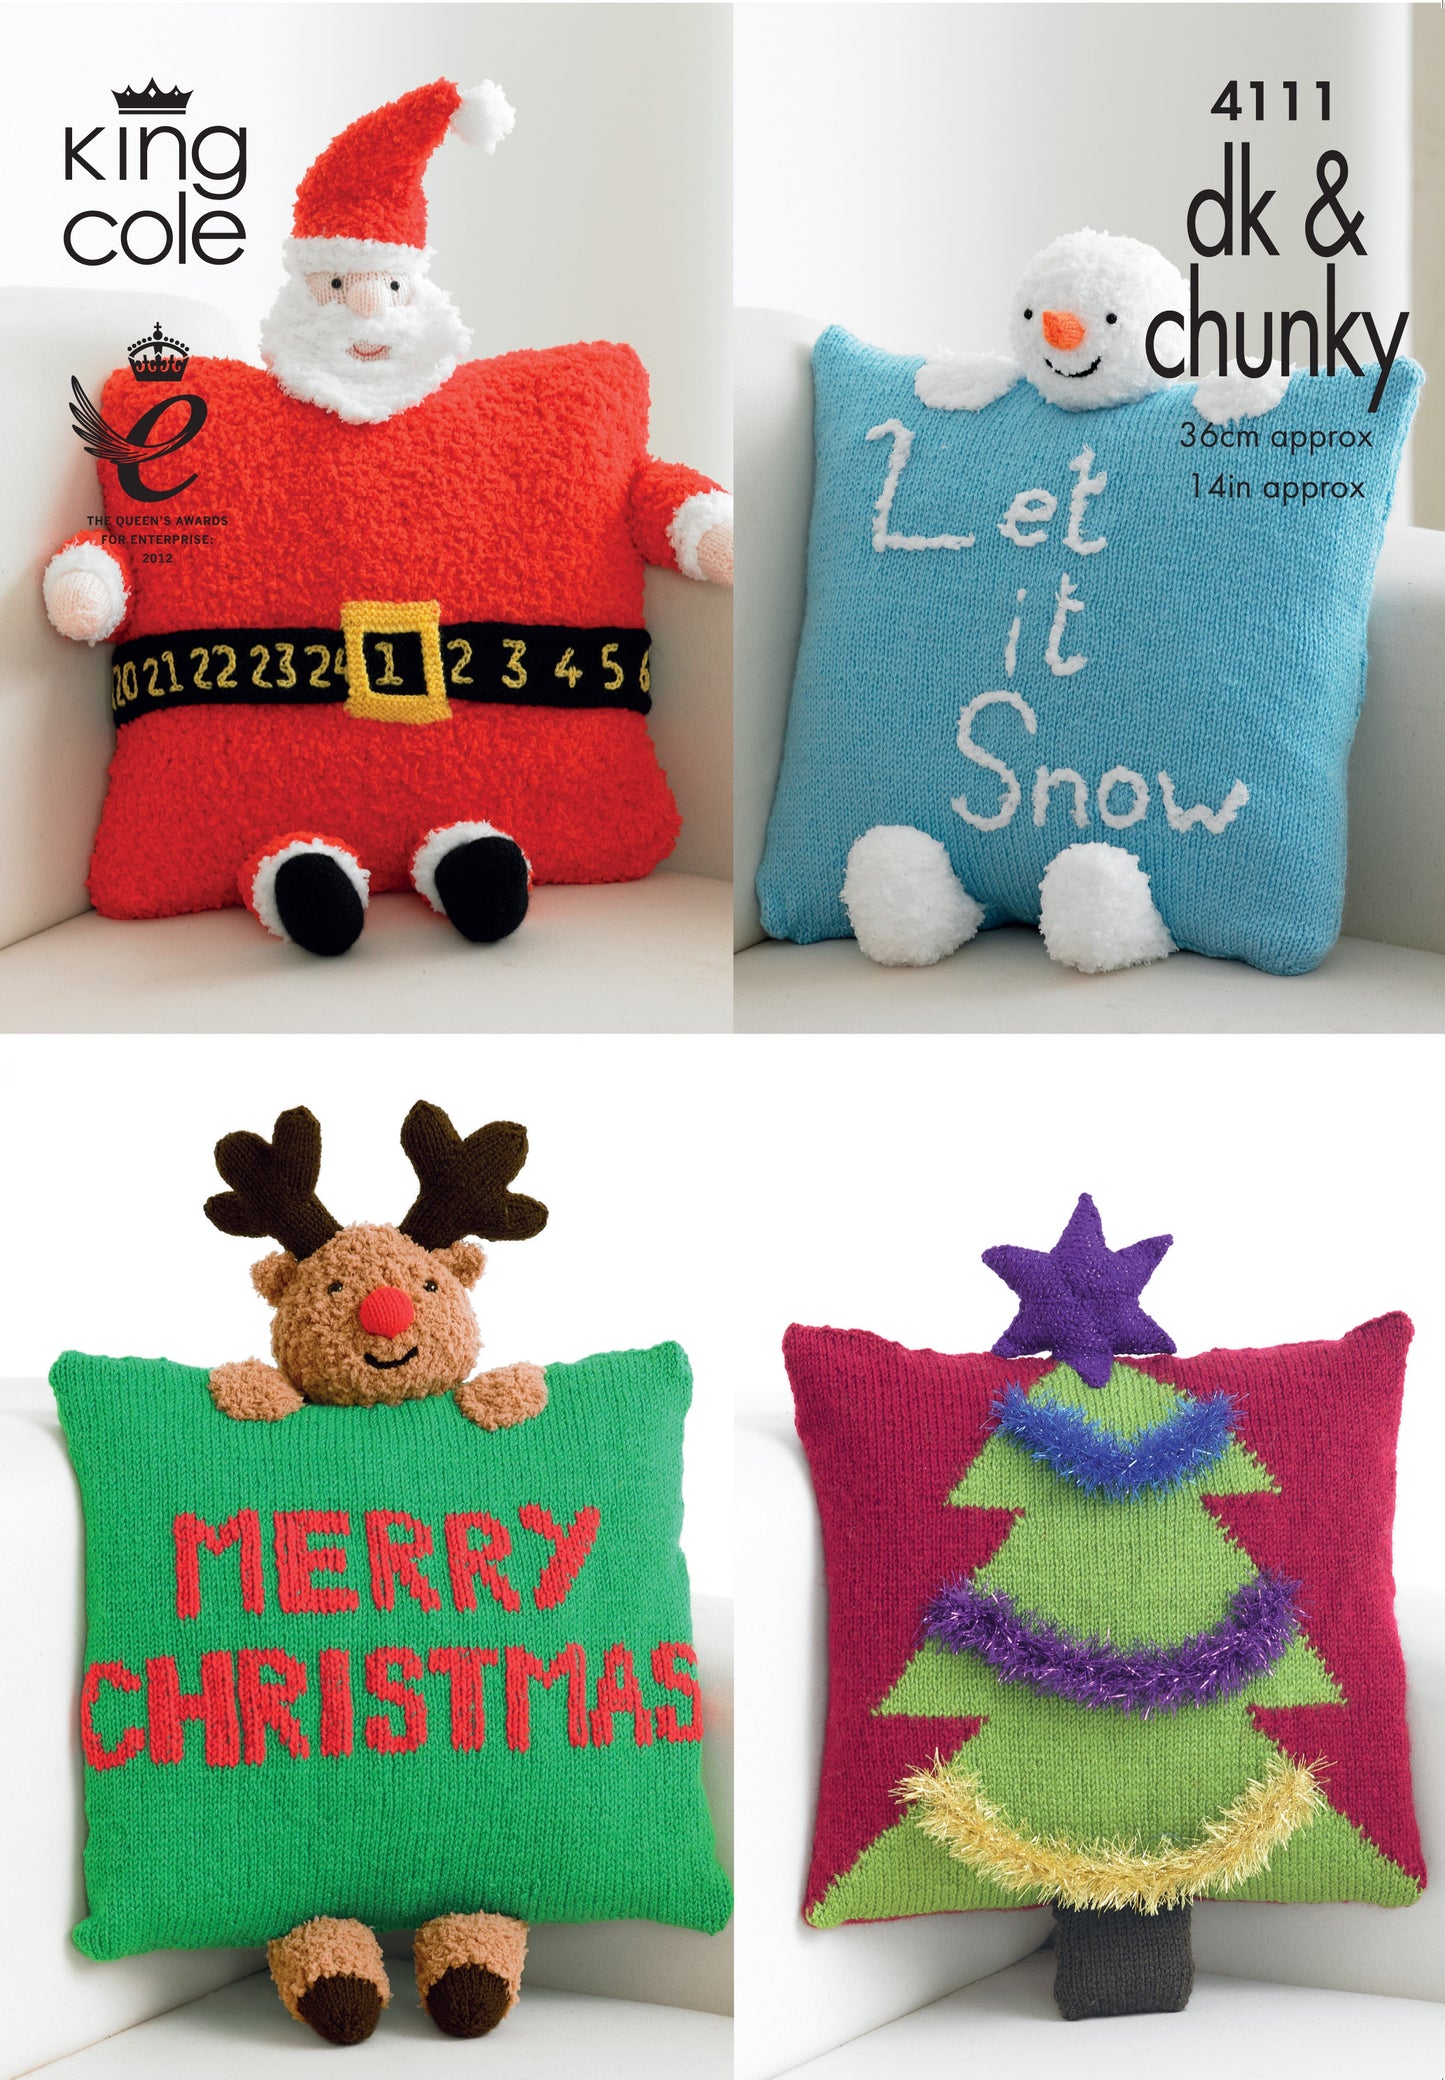 Knitting Pattern 4111 - Christmas Novelty Cushions Knitted in any King Cole DK/Chunky